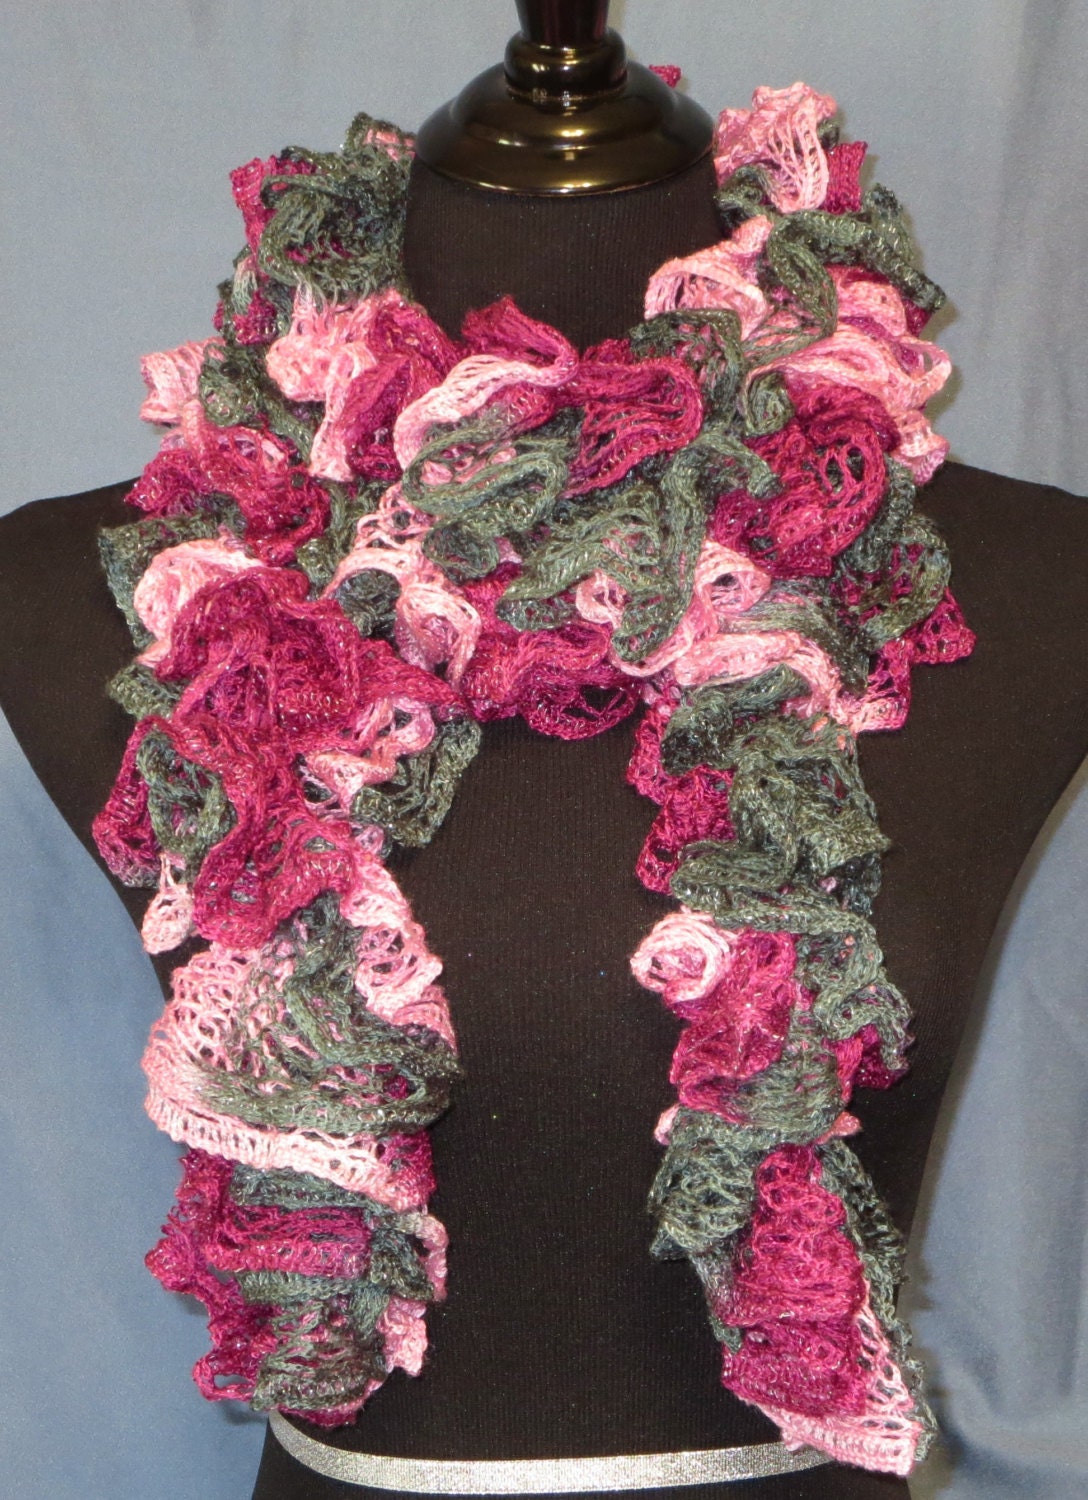 Handmade Crocheted Ruffle Scarf Pink / Gray by BeCreatives